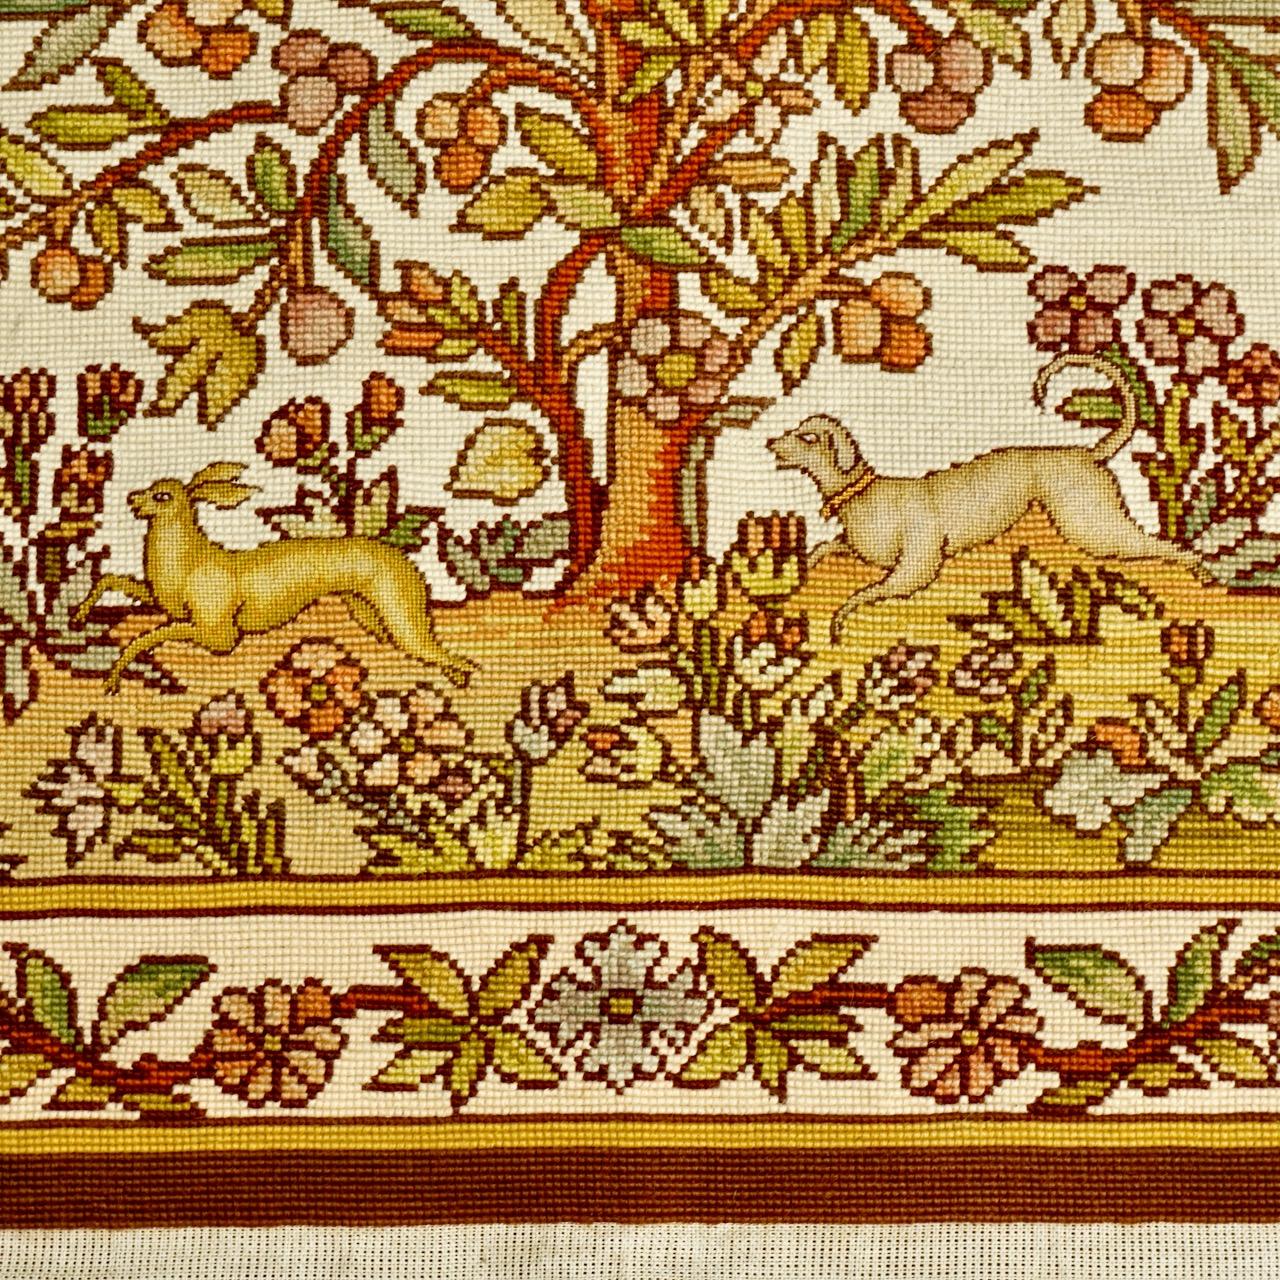 
Beautiful needlepoint tapestry with a medieval style design in warm colours. Featuring a fruit tree with a bird, flowers, and a dog chasing a rabbit. The tapestry is hand crafted. The piece measures width 78.5 cm / 30.9 inches by length 75 cm /